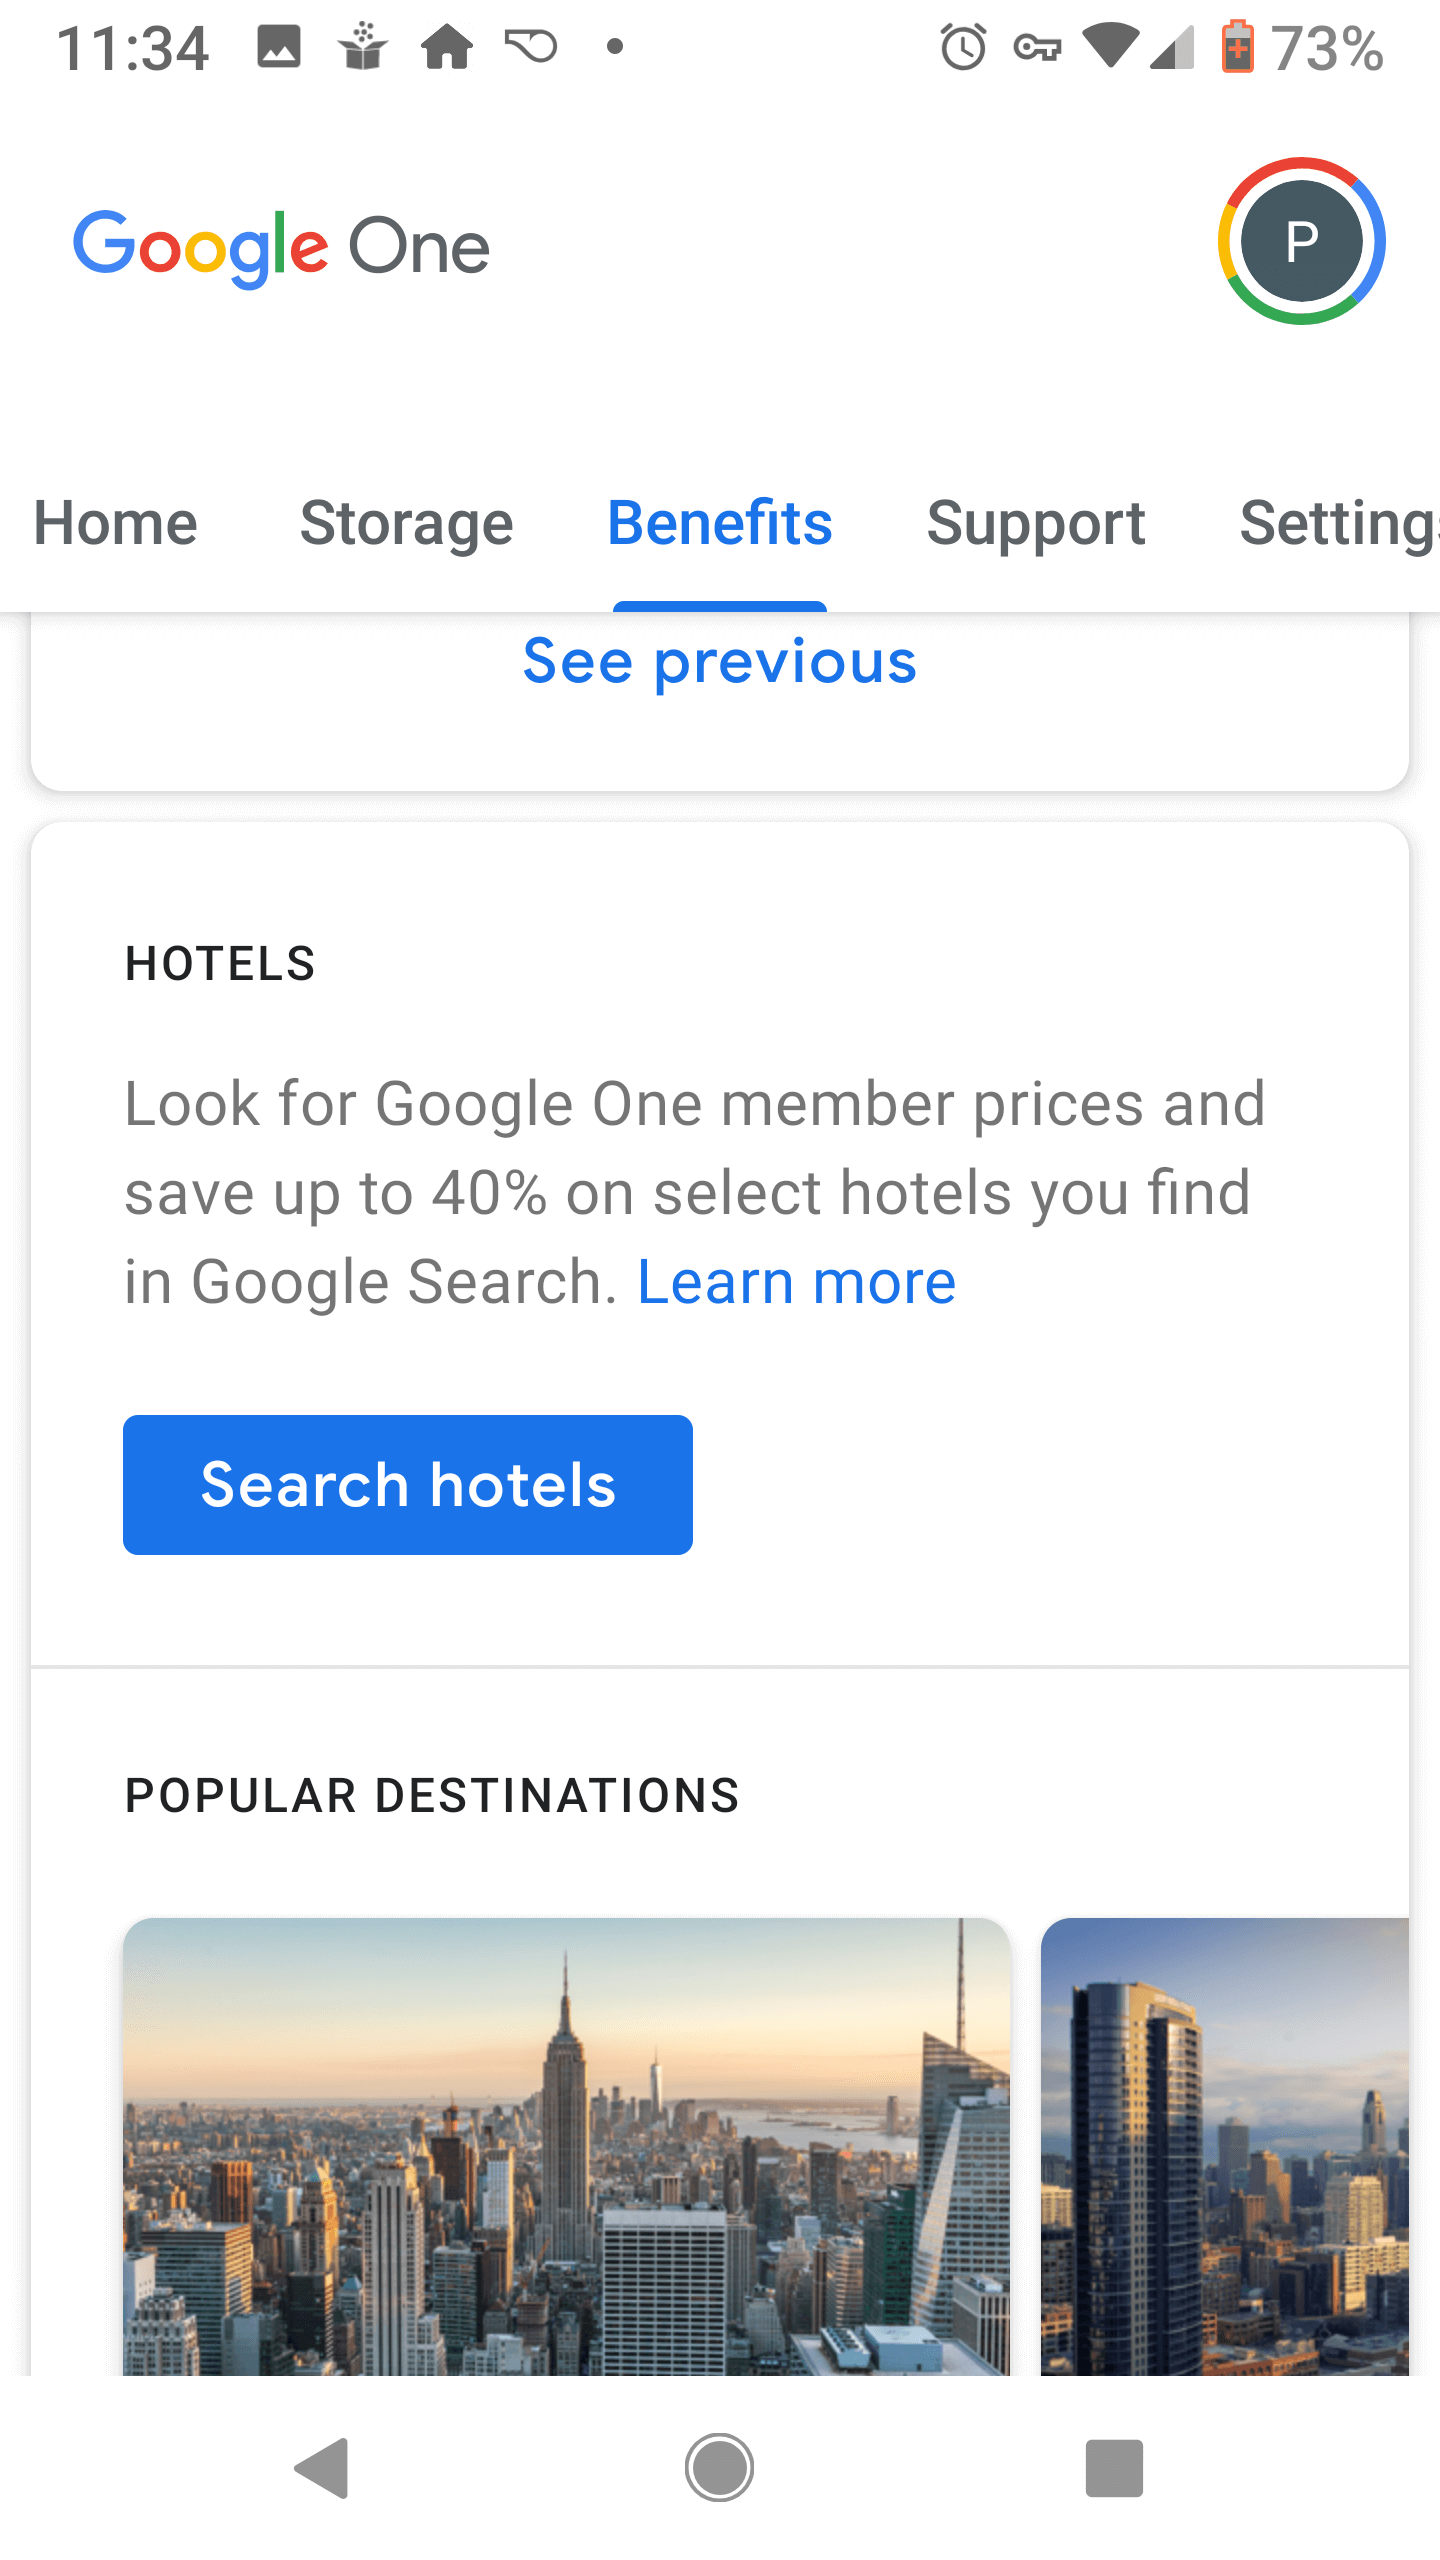 Google Drive's rebrand to Google One includes offers for hotels found in Search ...1440 x 2560